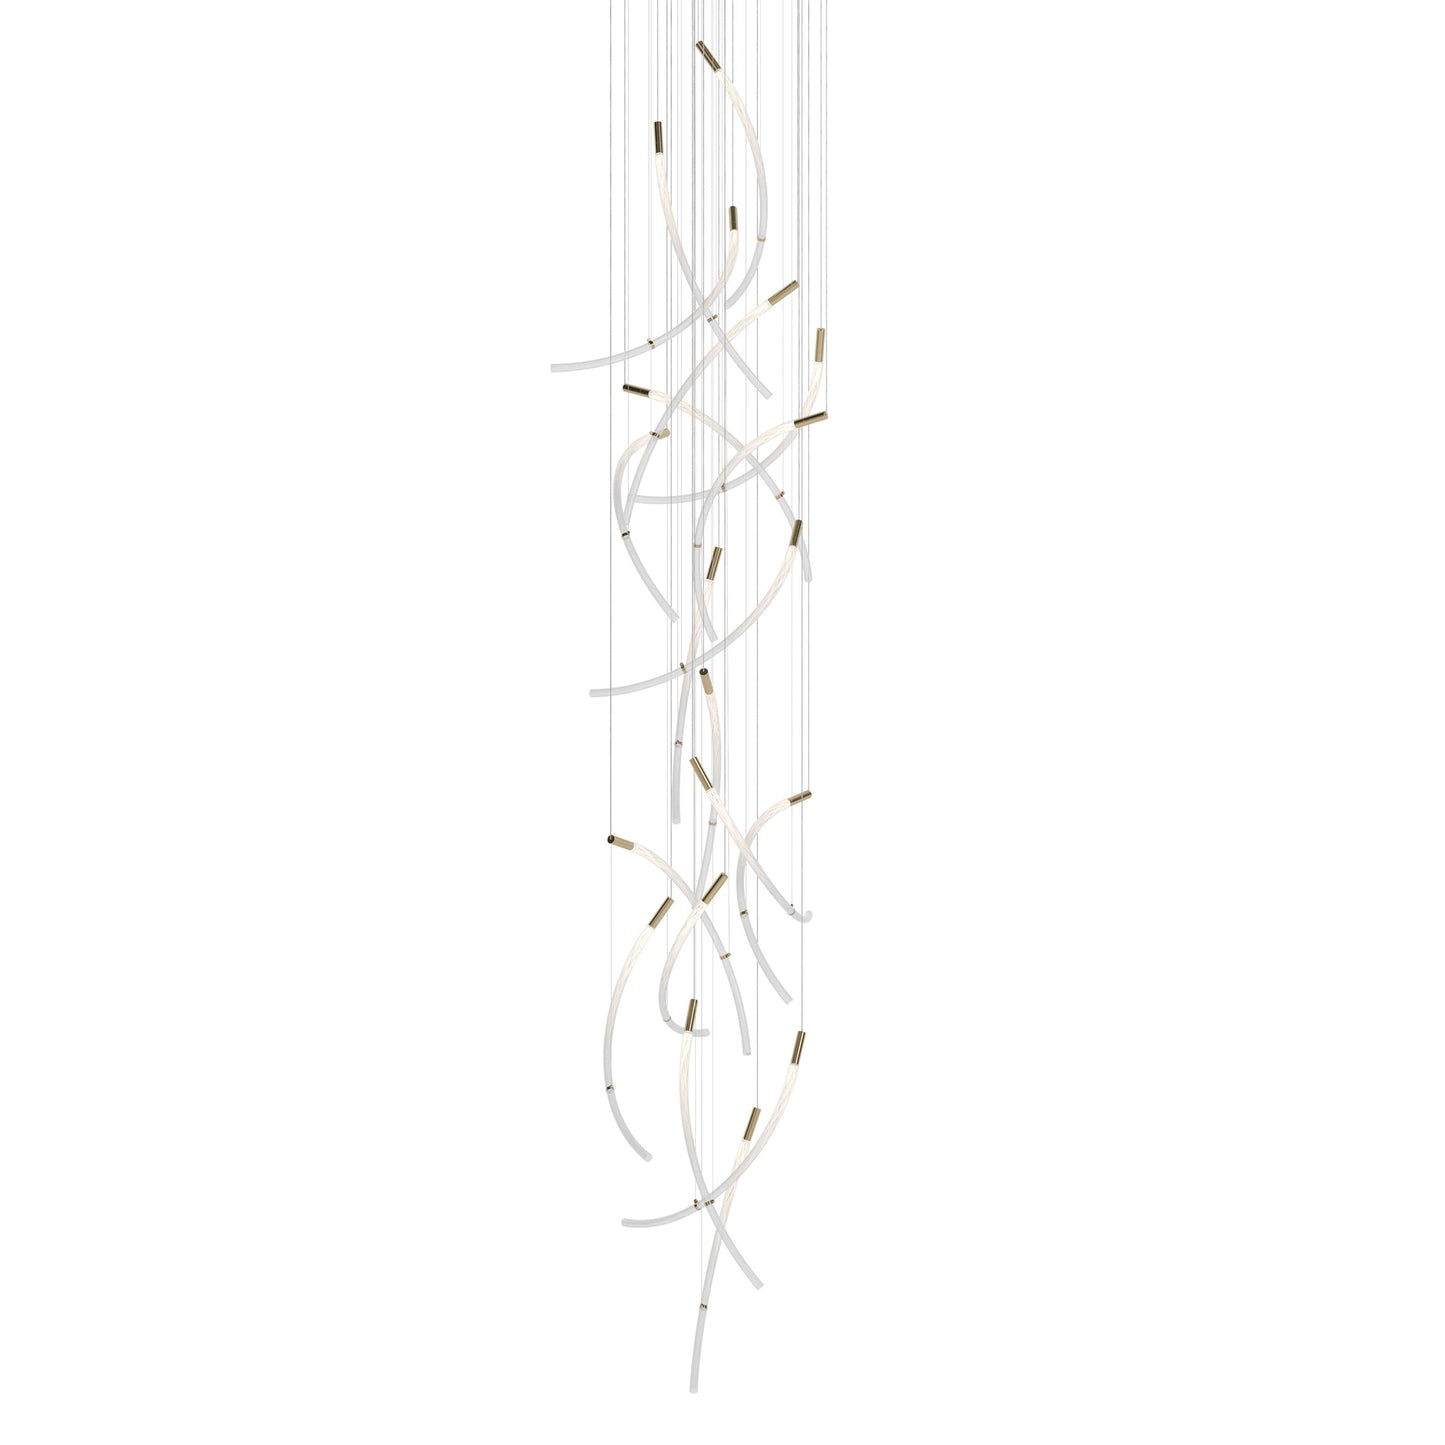 BOMMA - FLARE PENDANT - from $3,812.00